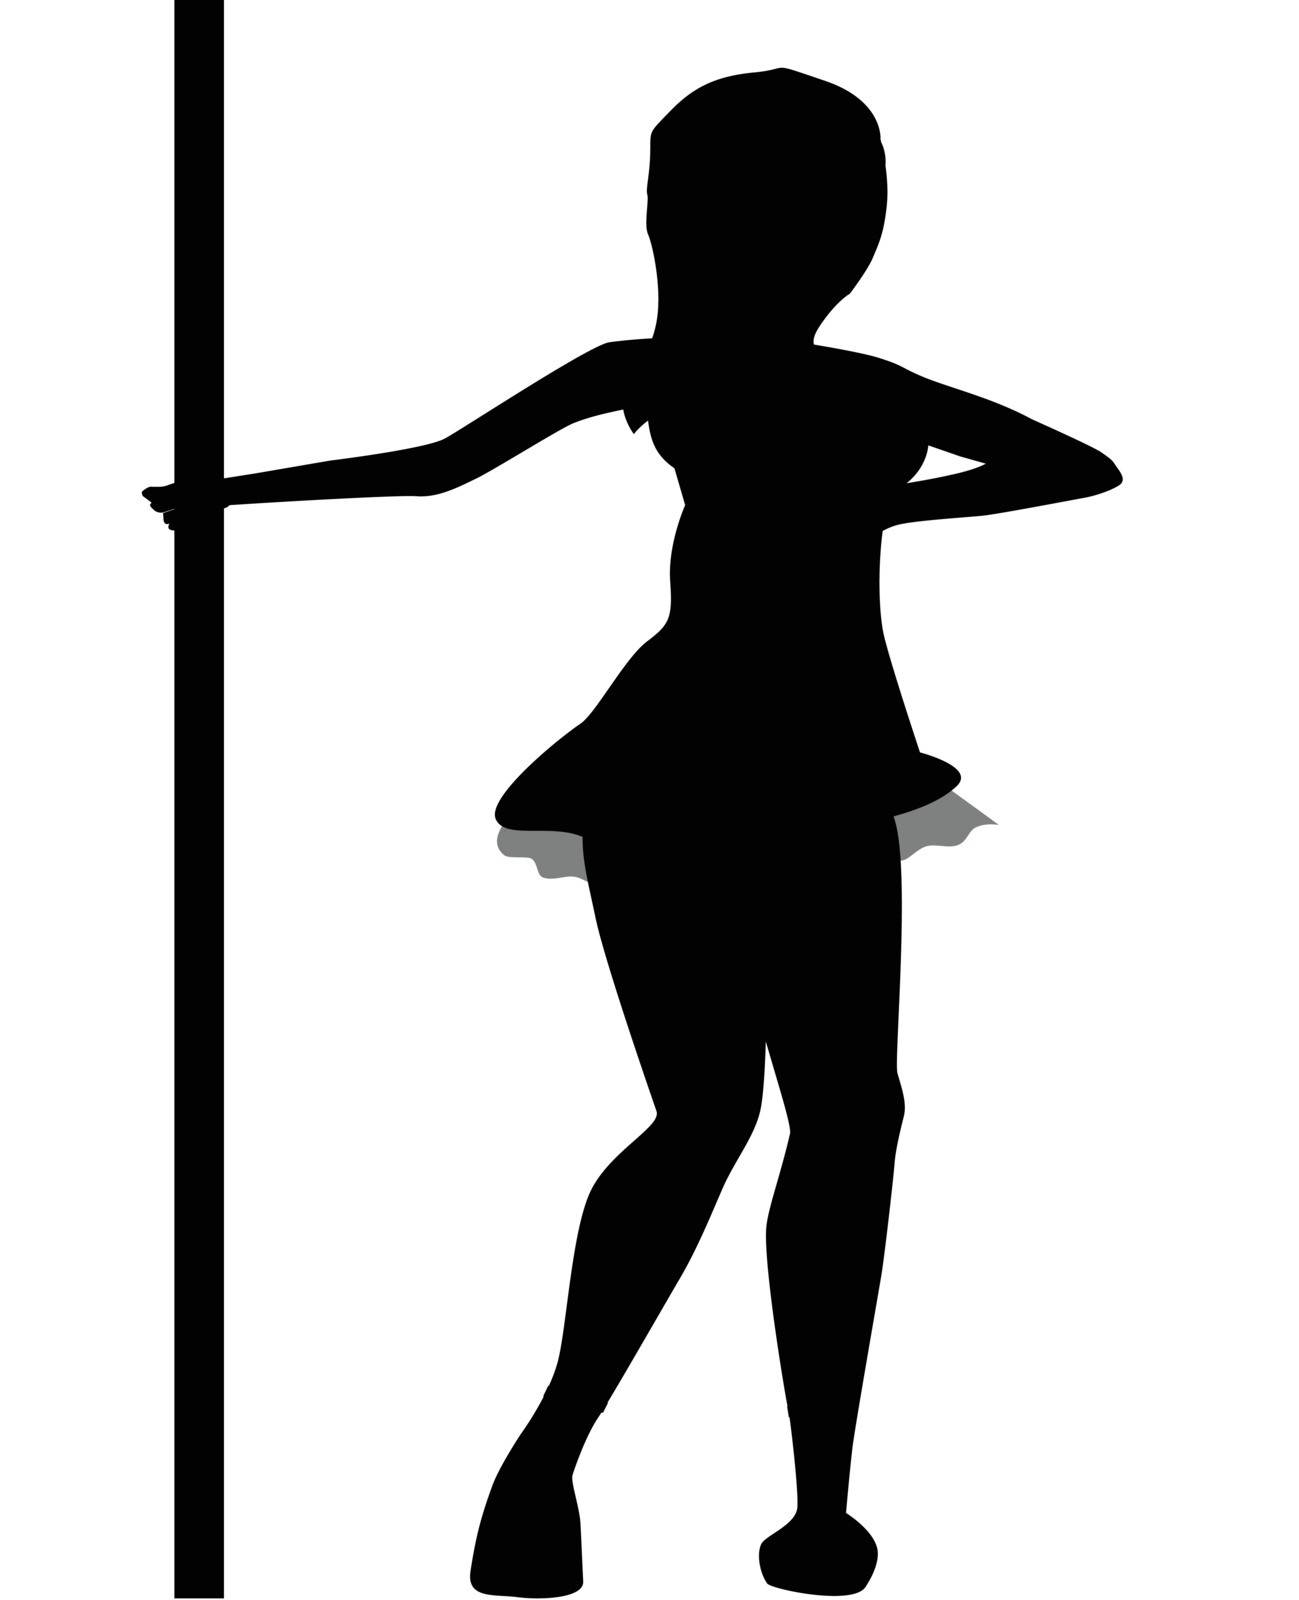 Silhouette of a girl dancing on stage